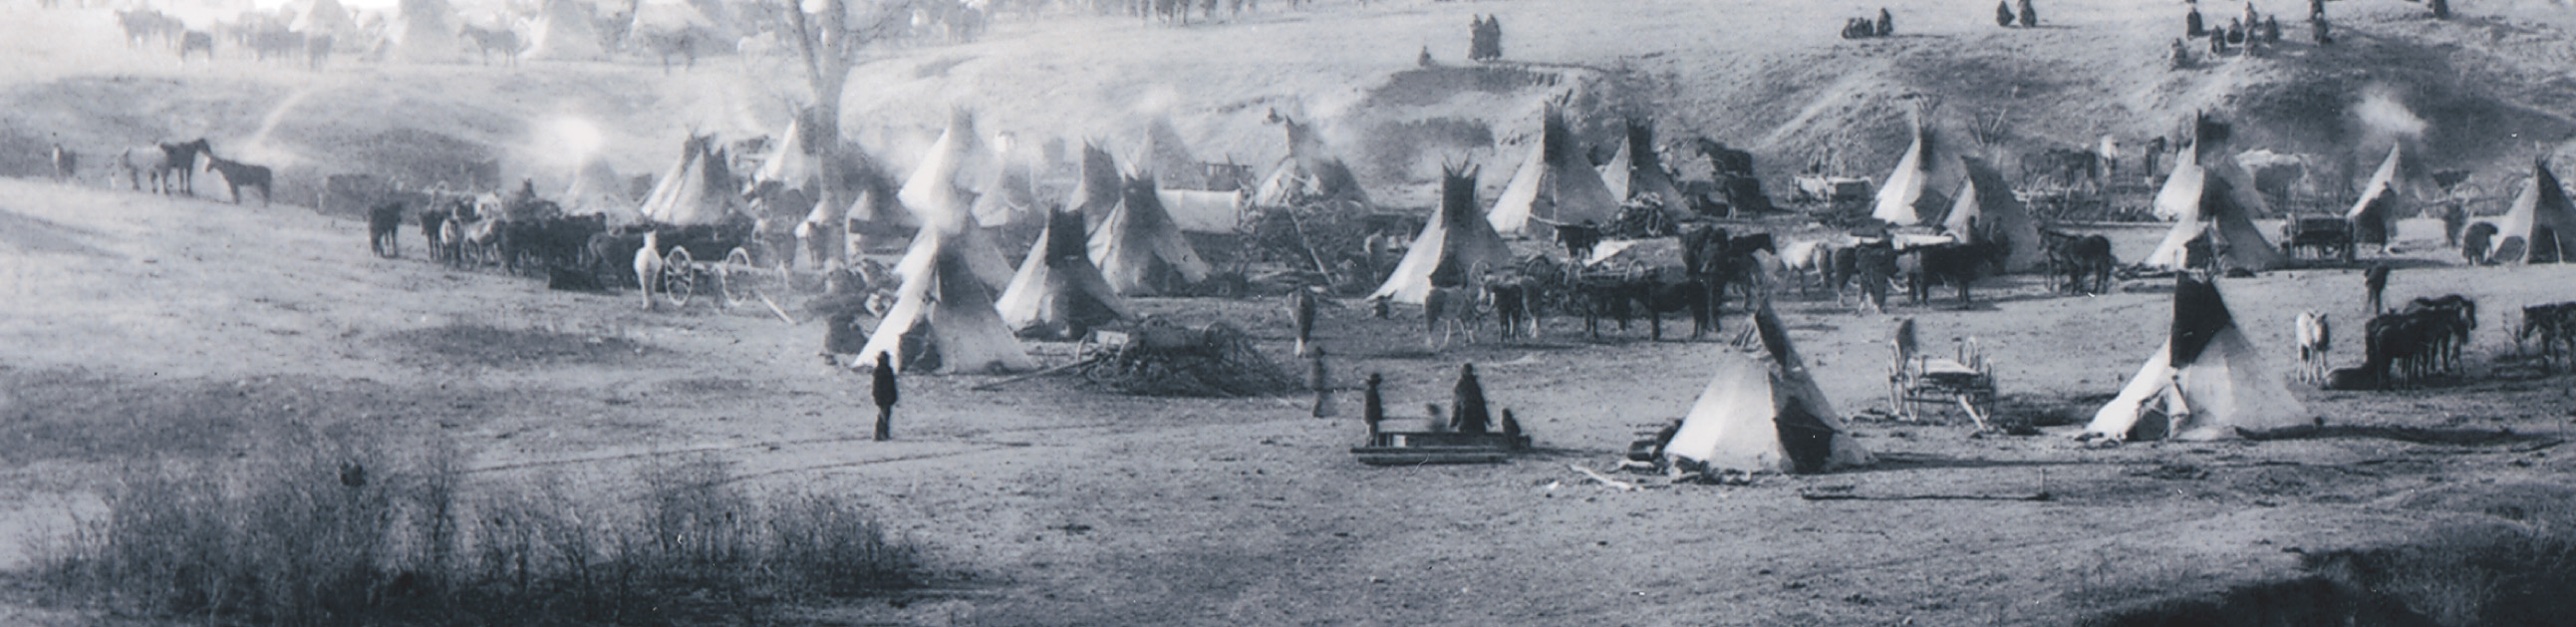 A photo shows a settlement of Native American tepees.